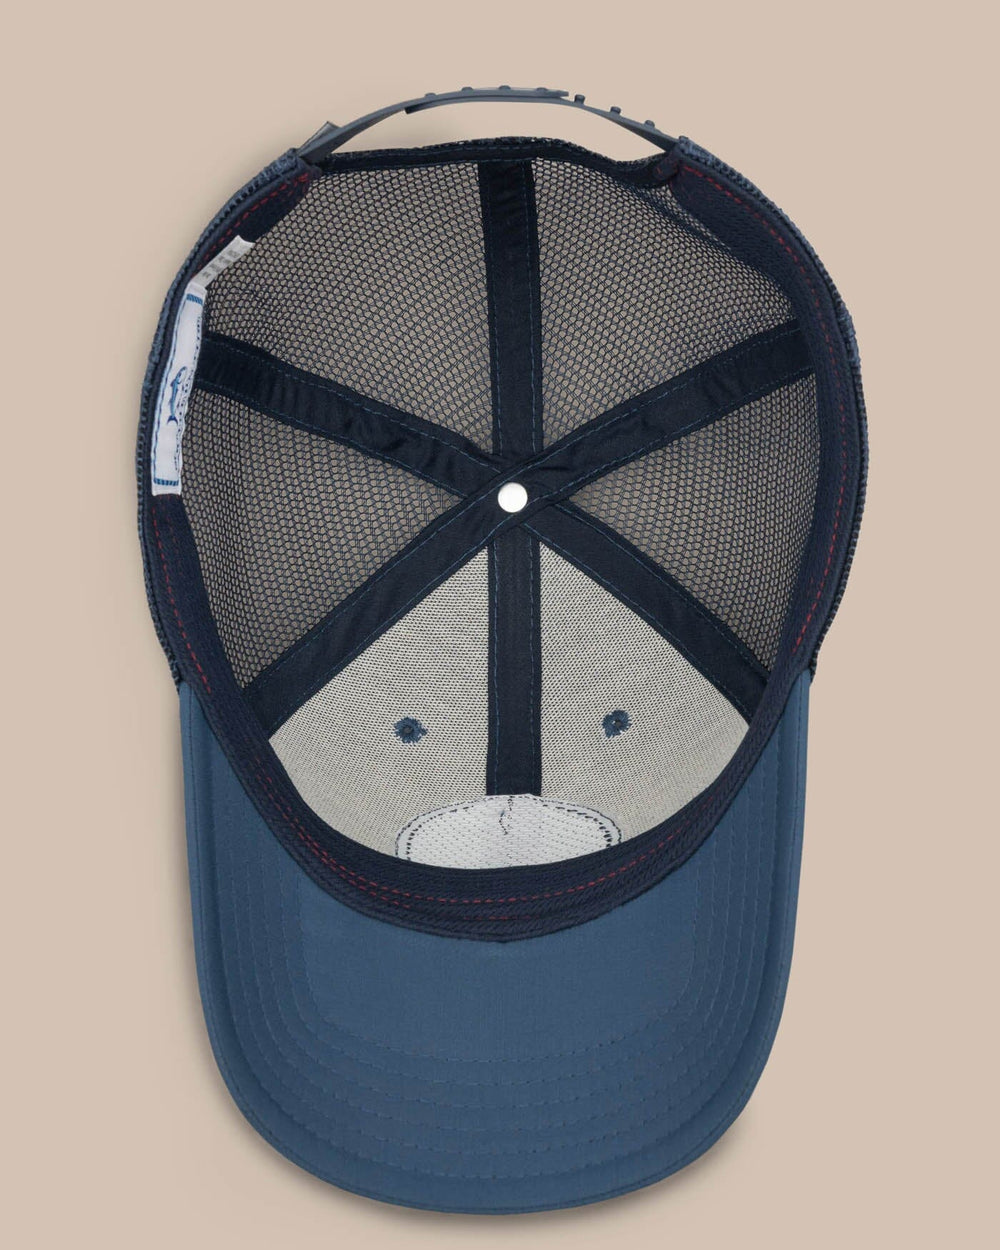 The below view of the Men's Florida Patch Performance Trucker Hat by Southern Tide - Seven Seas Blue